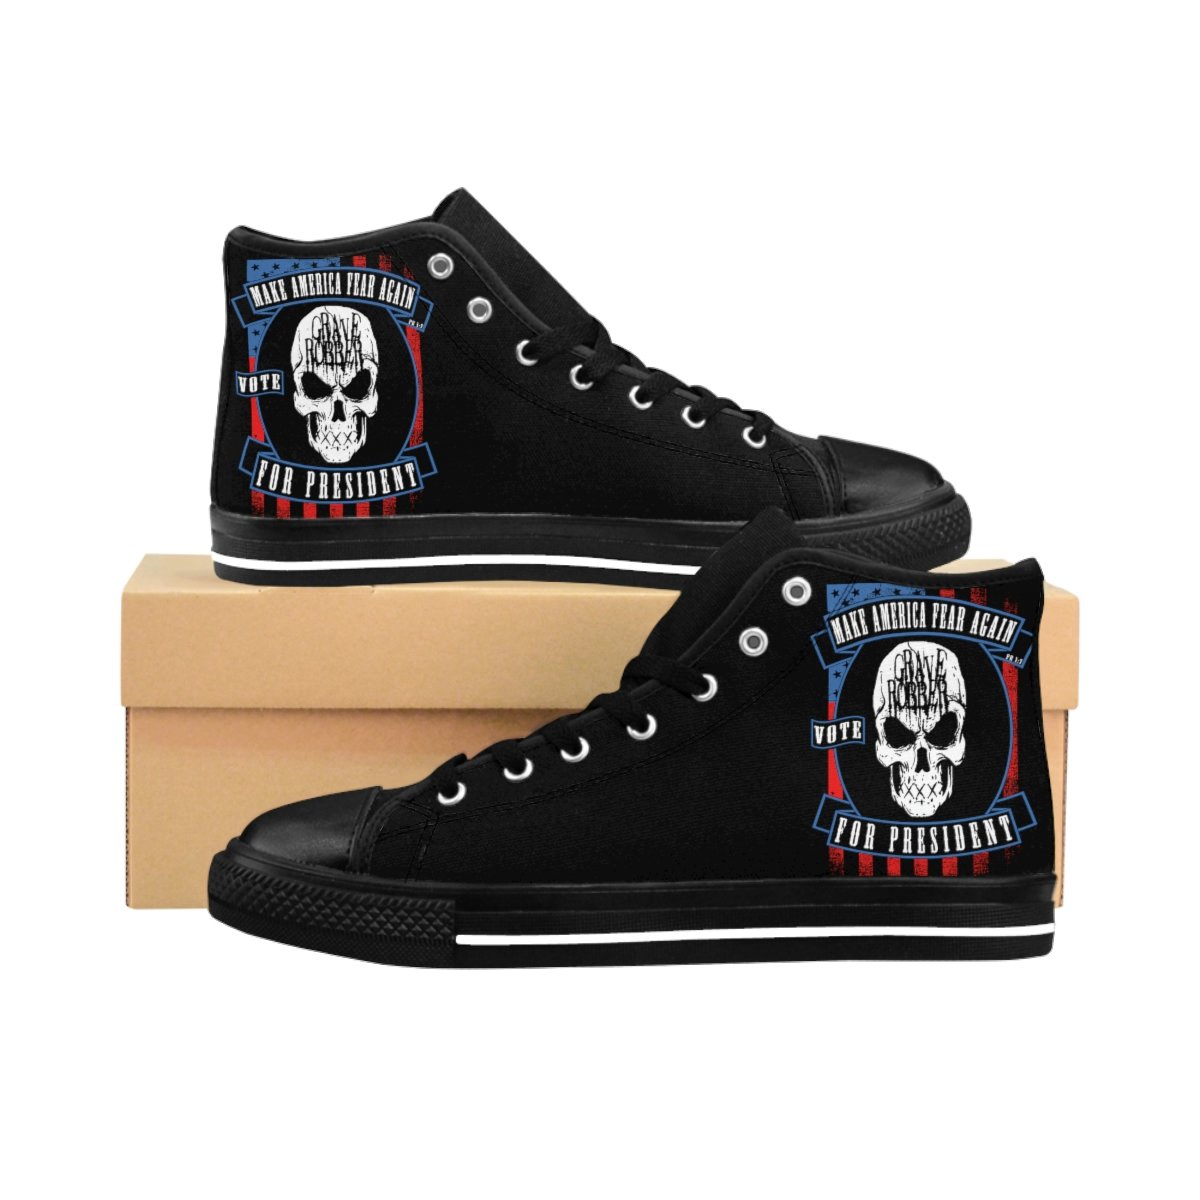 Grave Robber Make America Fear Again Women’s High-top Sneakers